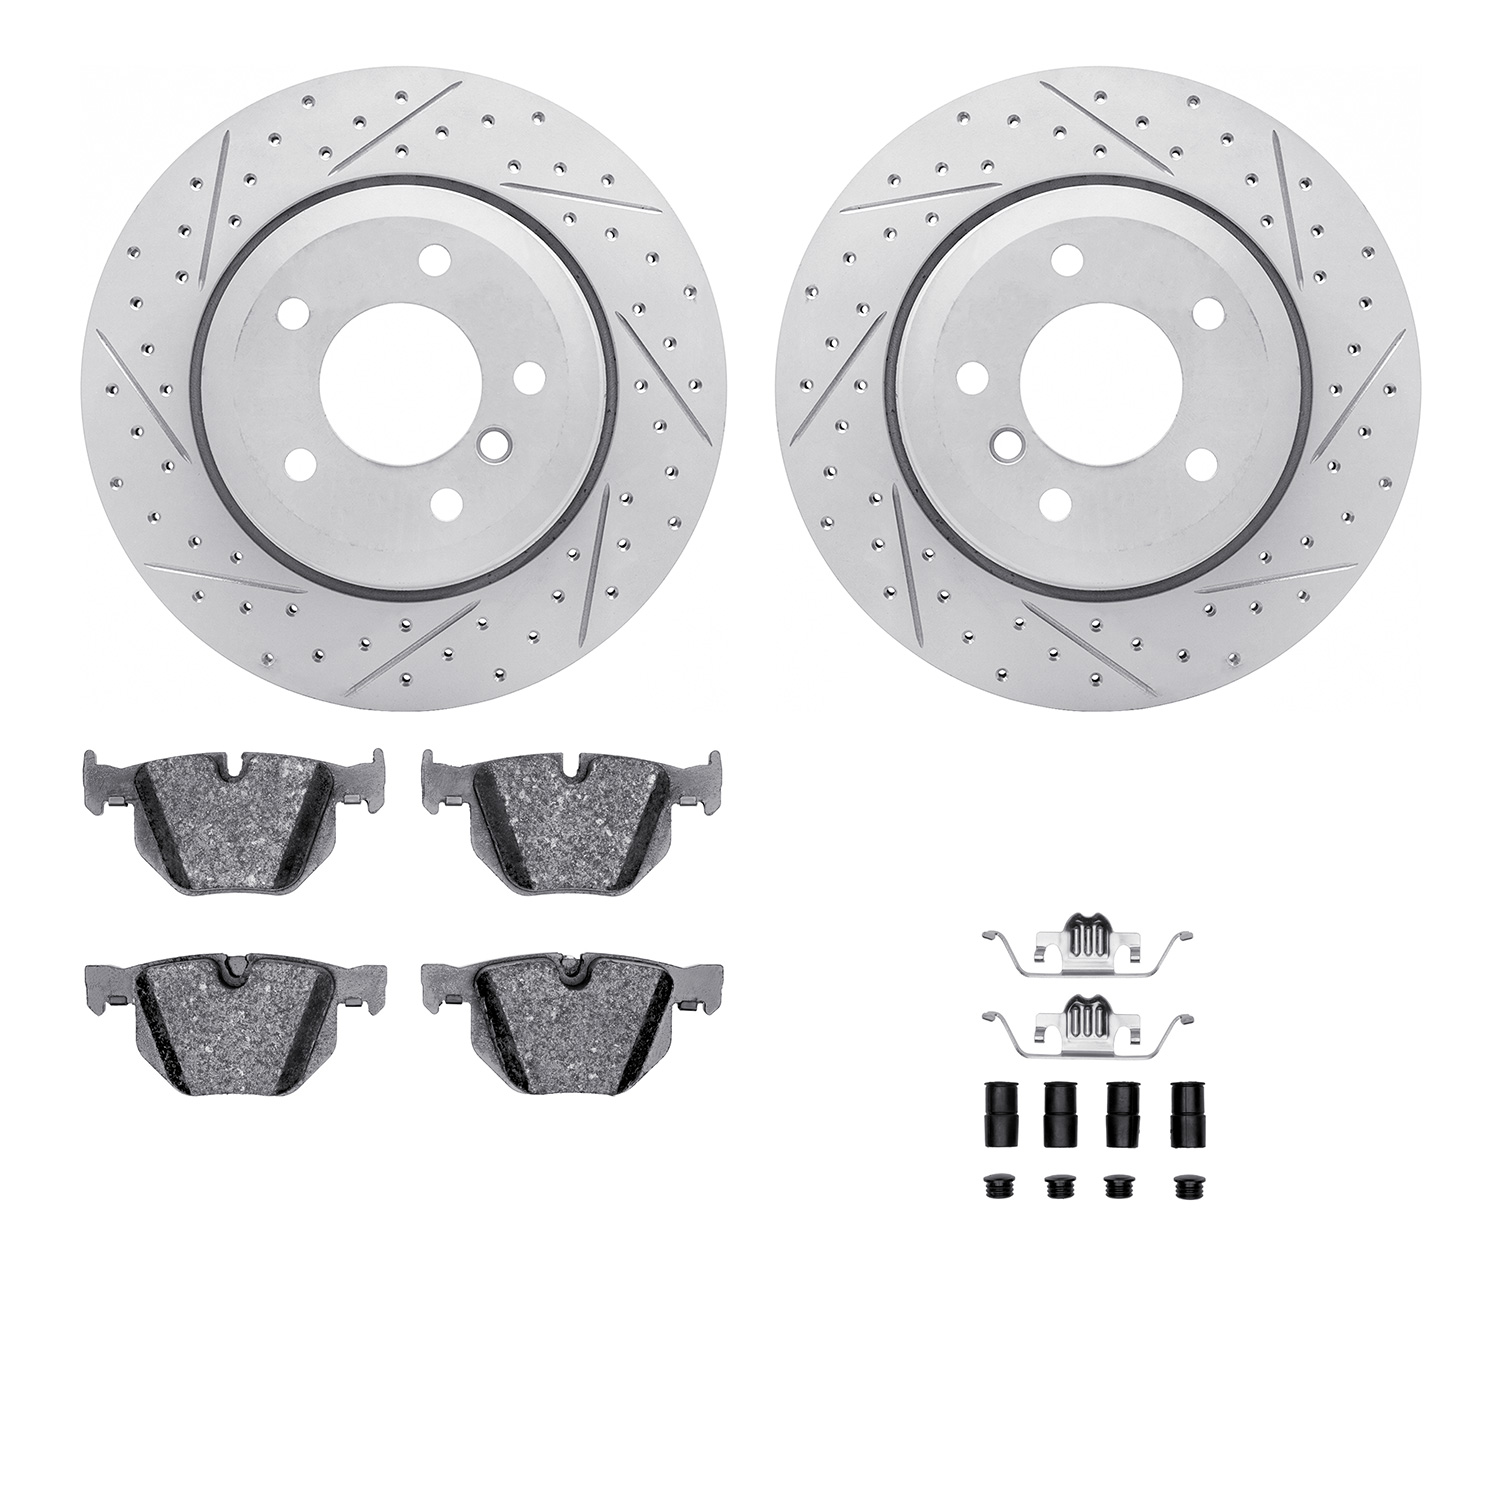 2512-31049 Geoperformance Drilled/Slotted Rotors w/5000 Advanced Brake Pads Kit & Hardware, 2006-2010 BMW, Position: Rear